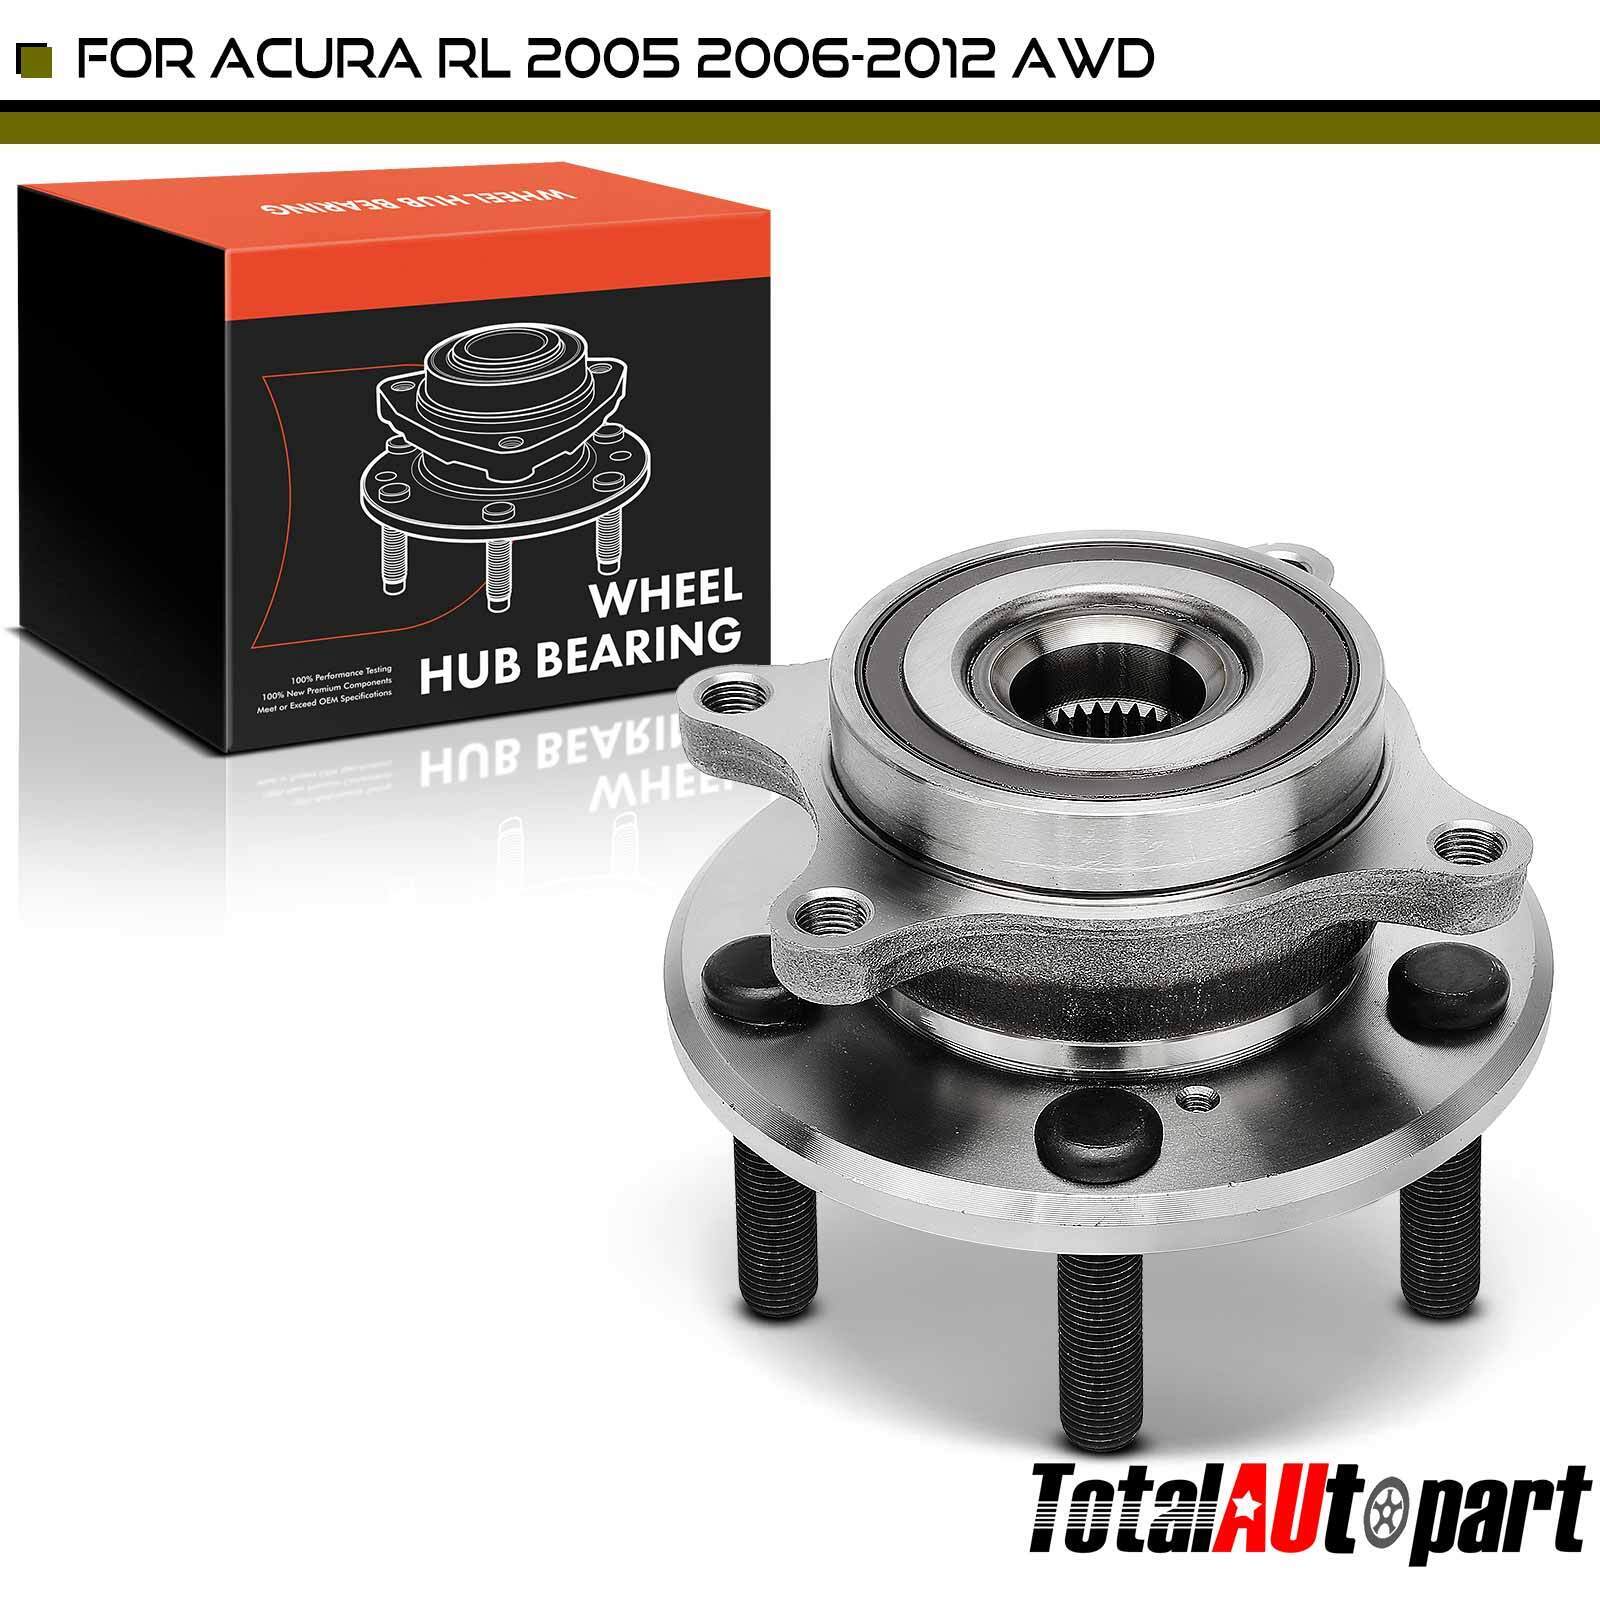 New Wheel Bearing Hub Assembly for Acura RL 2005-2012 AWD Front Left or Right